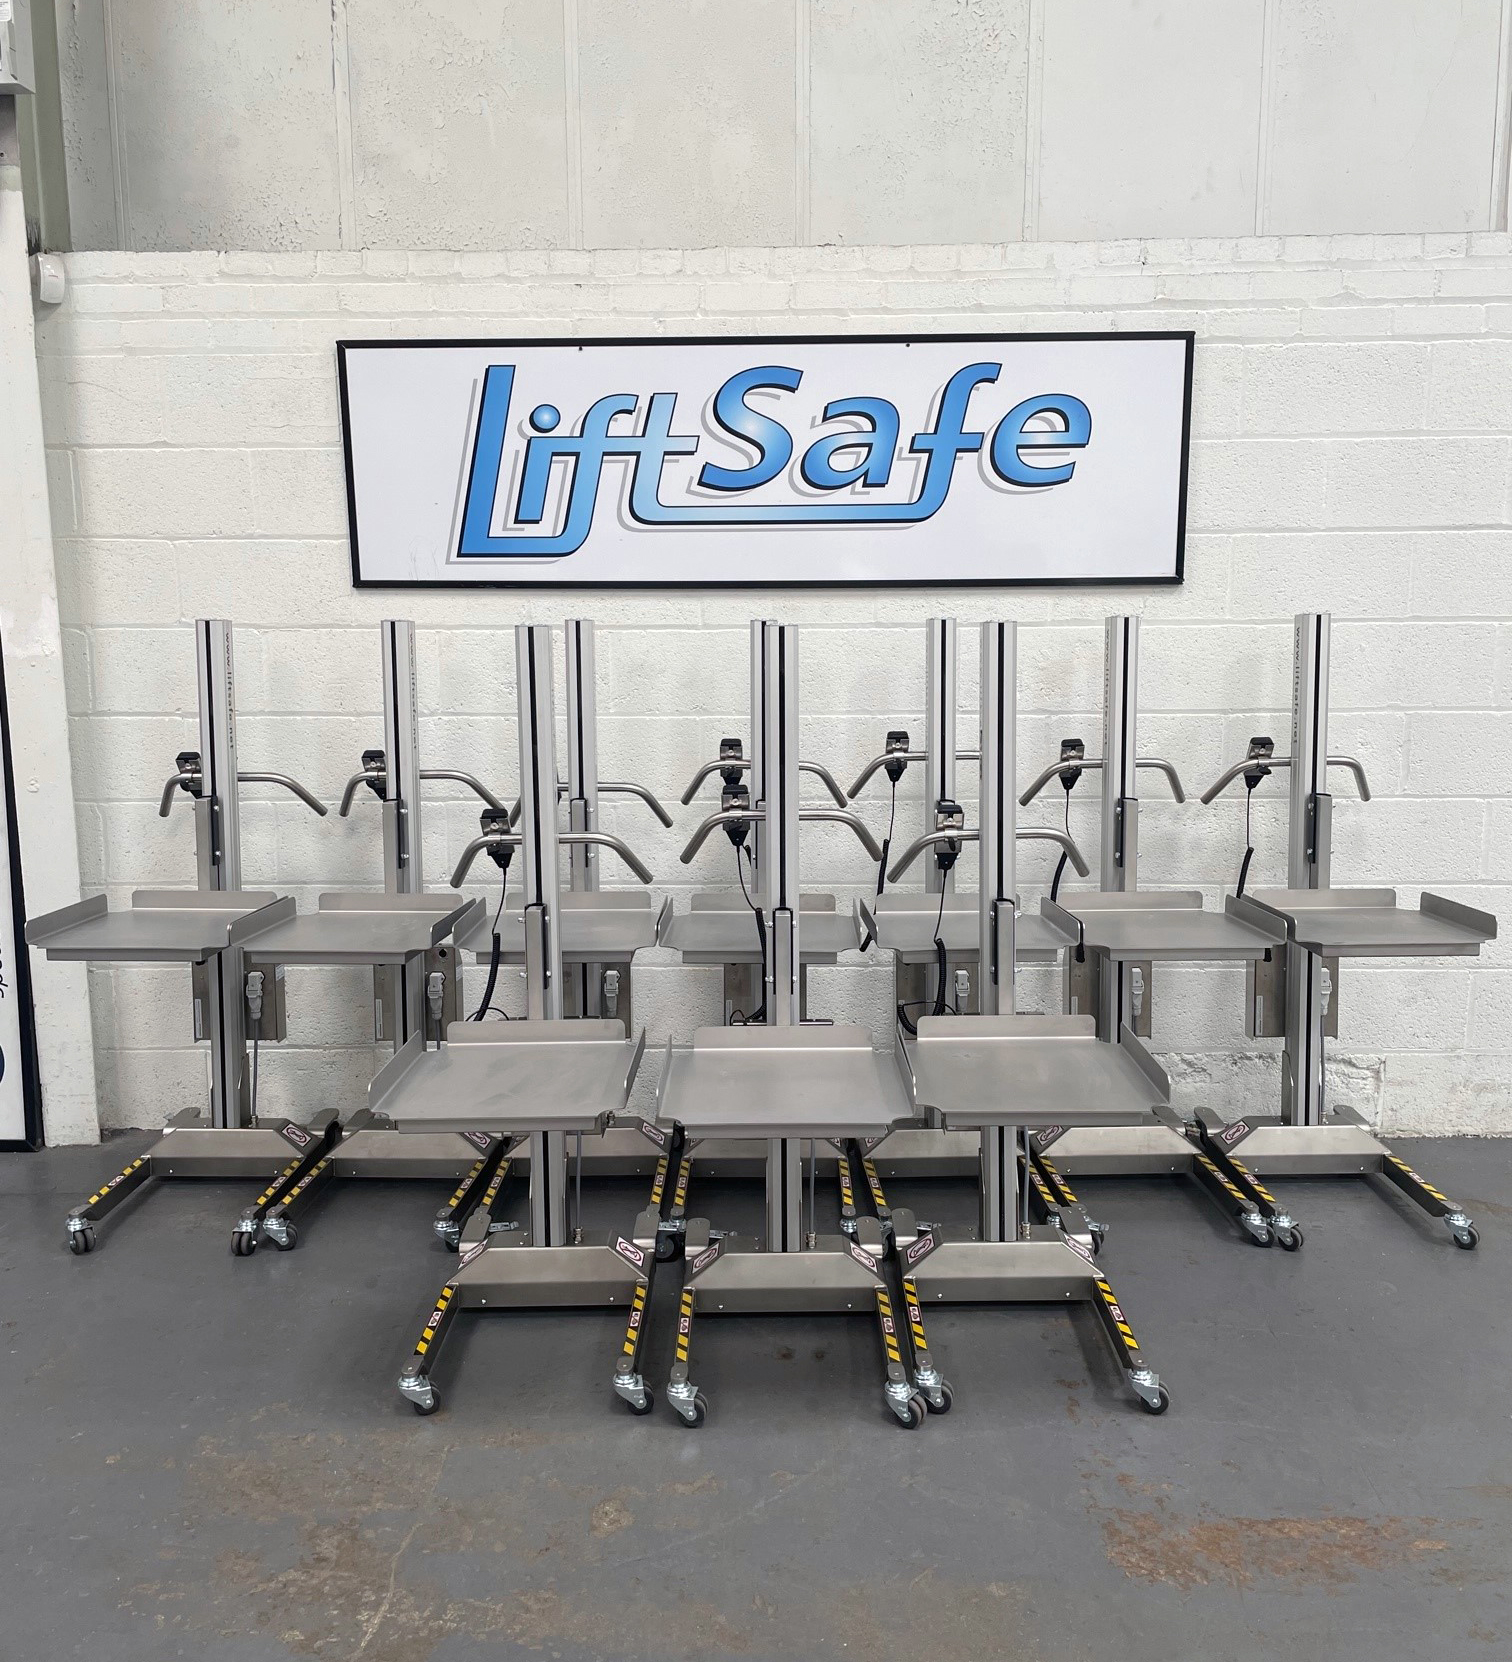 NHS Hospital Takes Delivery of 10 Fluid Lifters